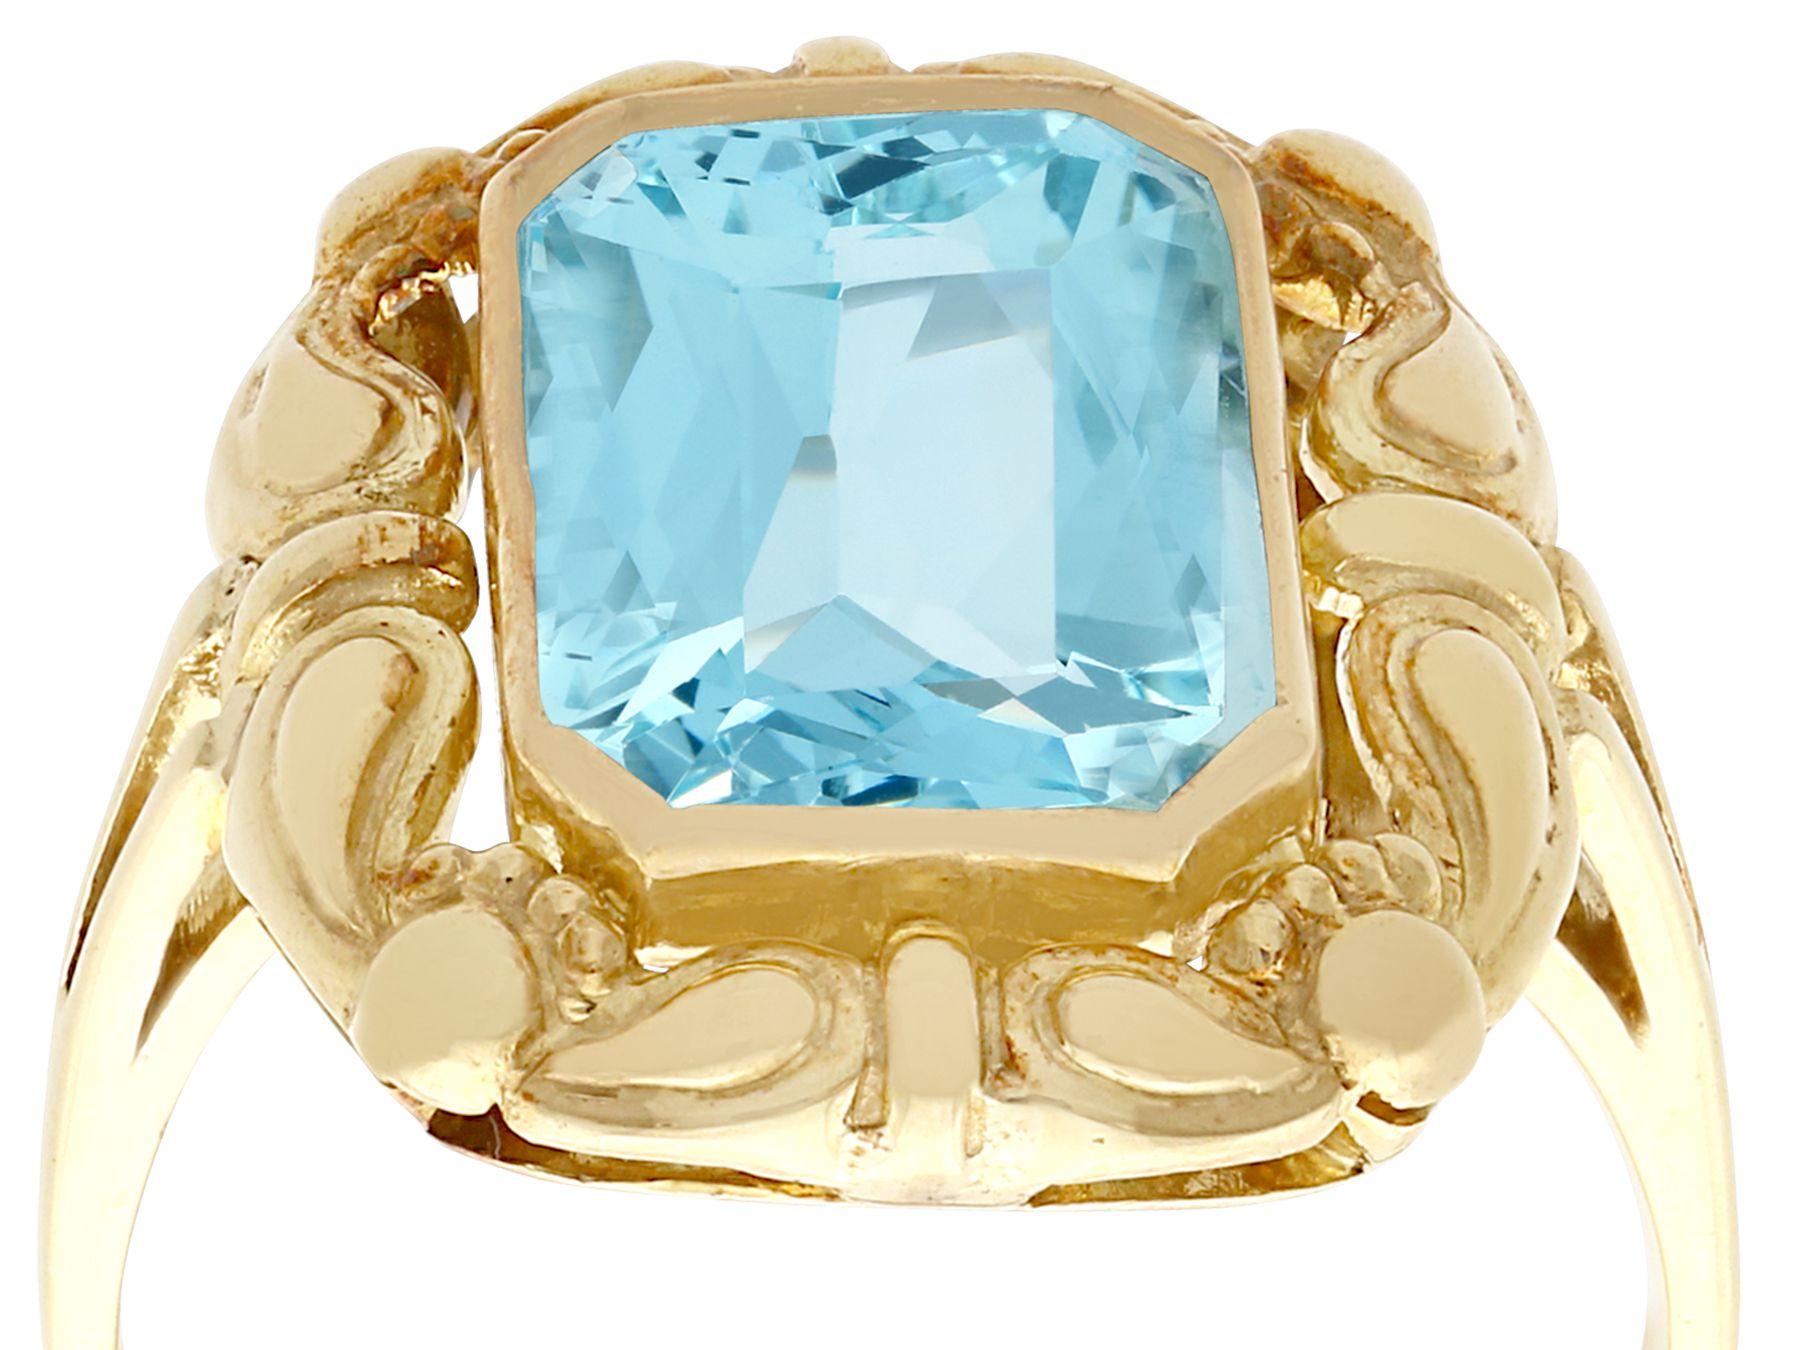 An impressive antique German 4.10 carat aquamarine, 8 karat yellow gold dress ring; part of our diverse antique jewelry and estate jewelry collections.

This stunning, fine and impressive antique gold emerald cut aquamarine ring has been crafted in